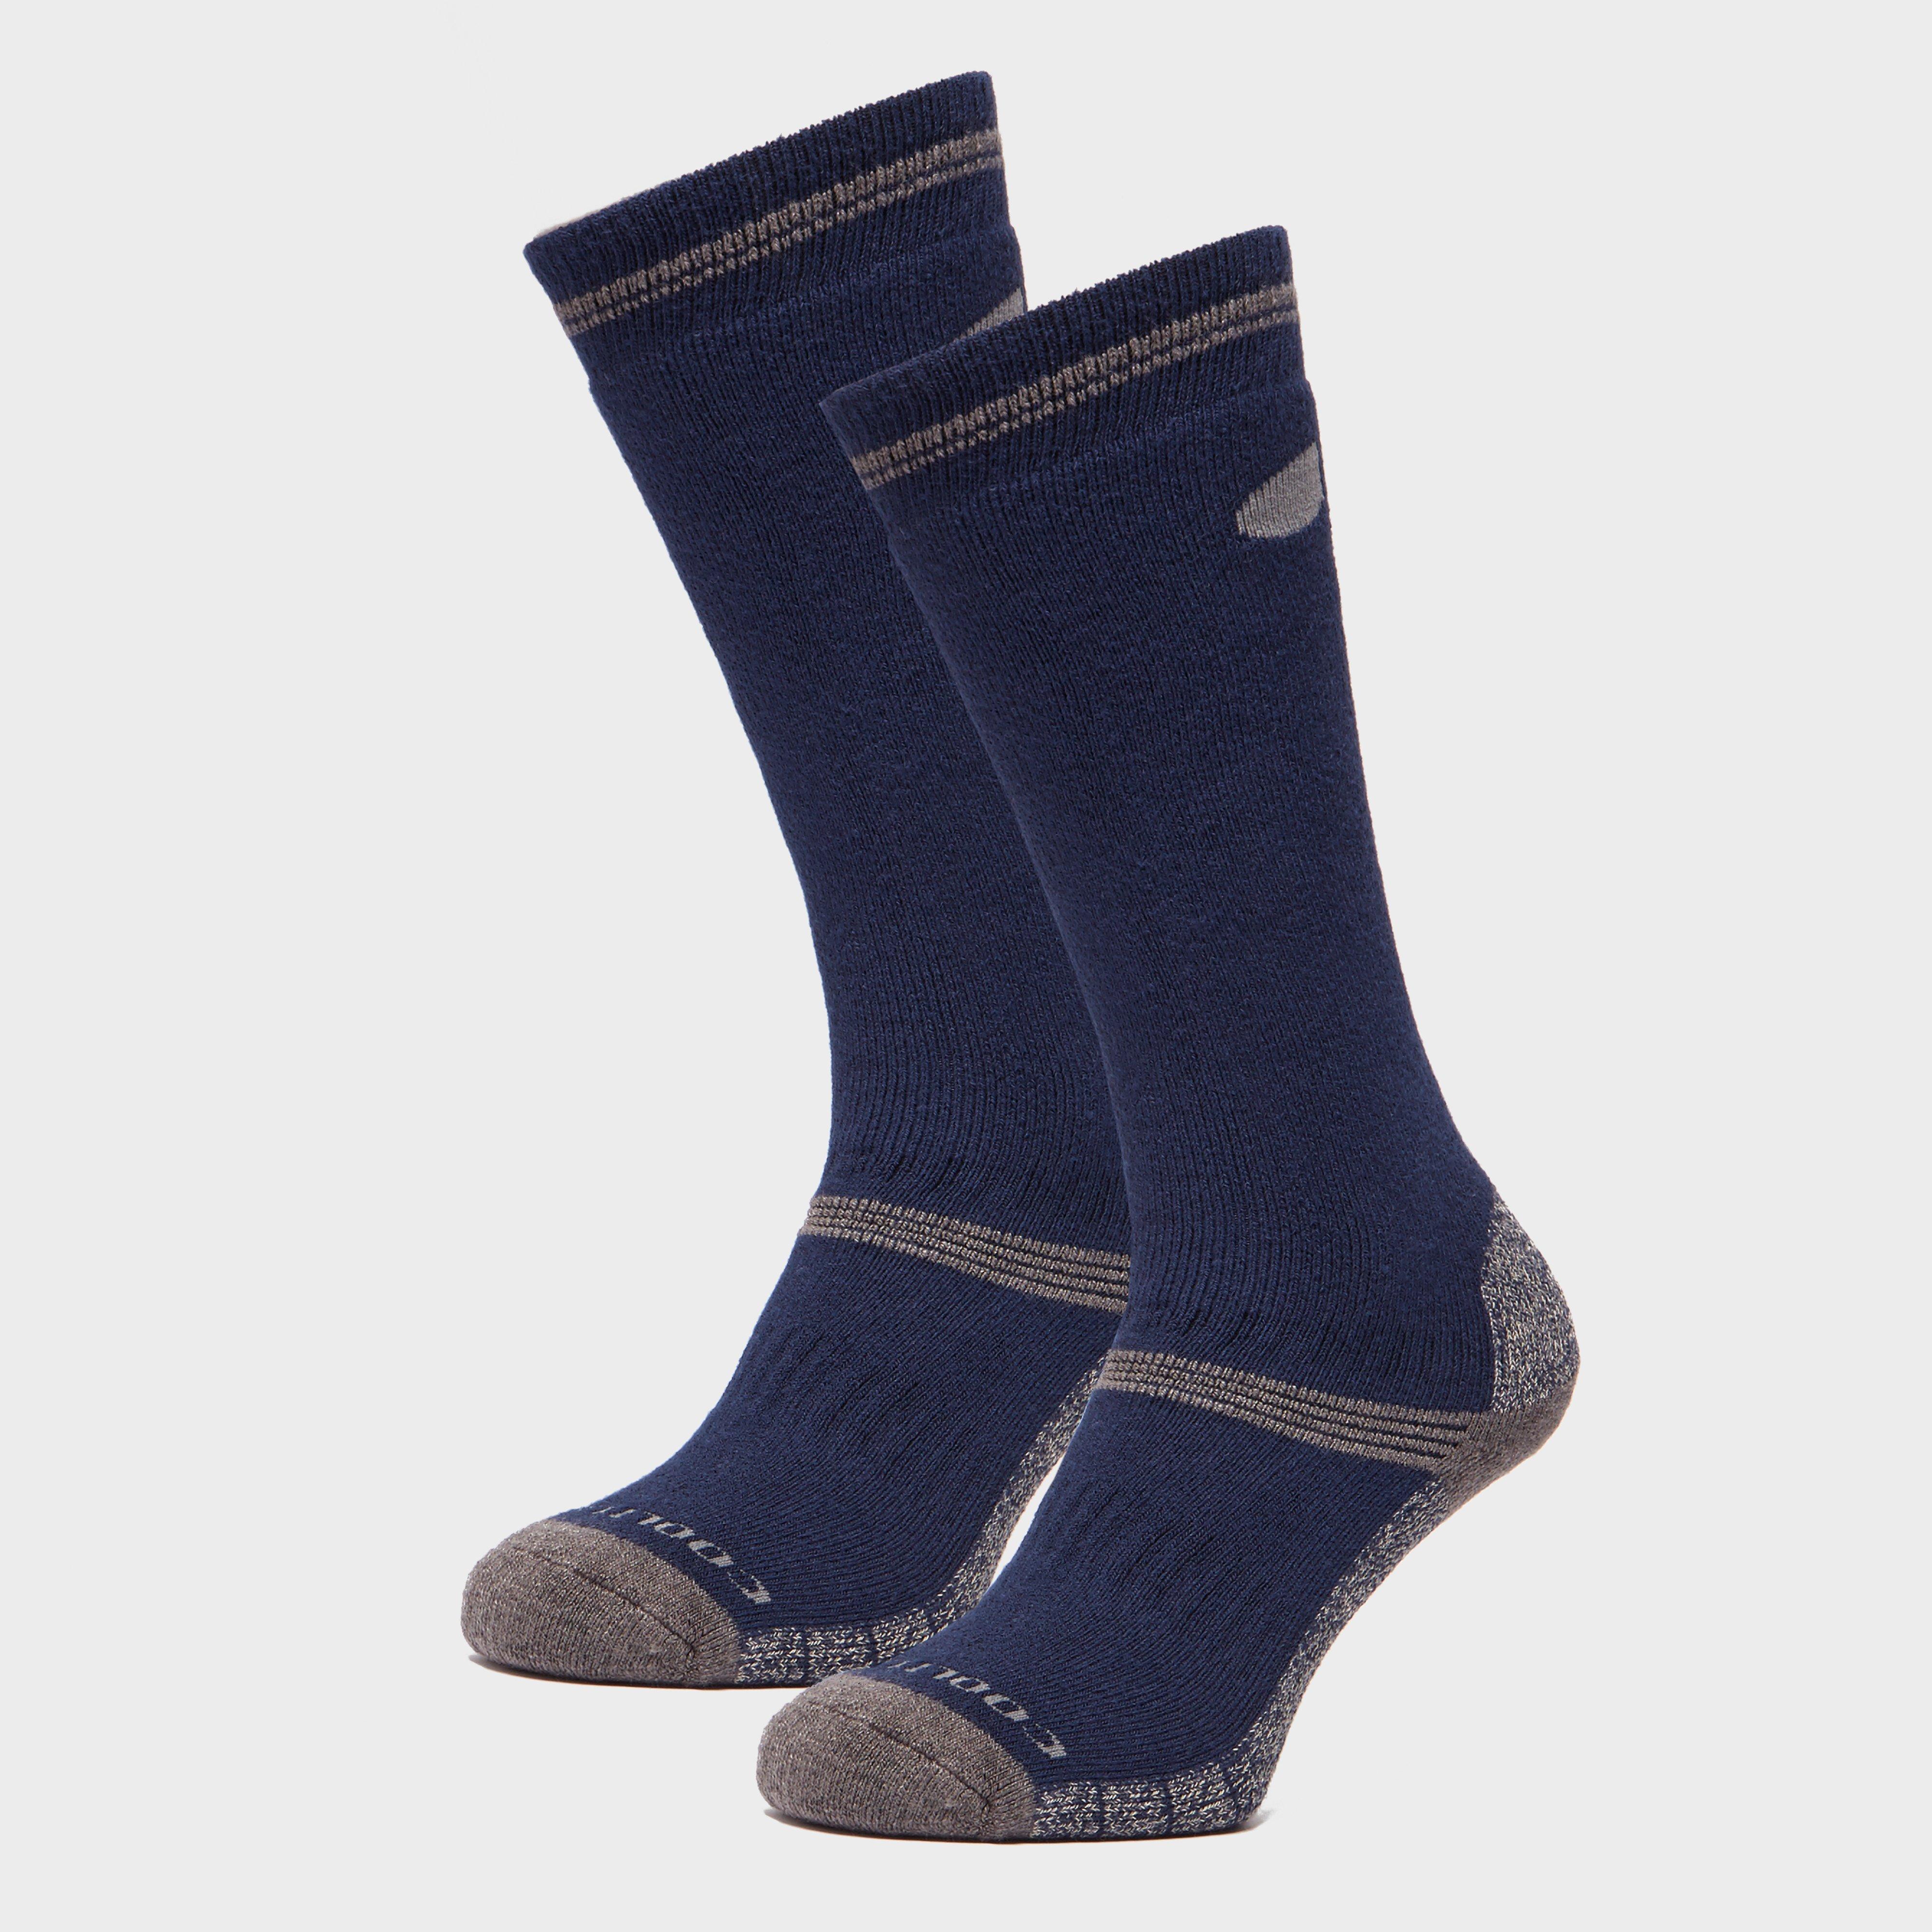 Peter Storm Midweight Socks - 2 Pack - Navy/nvy  Navy/nvy